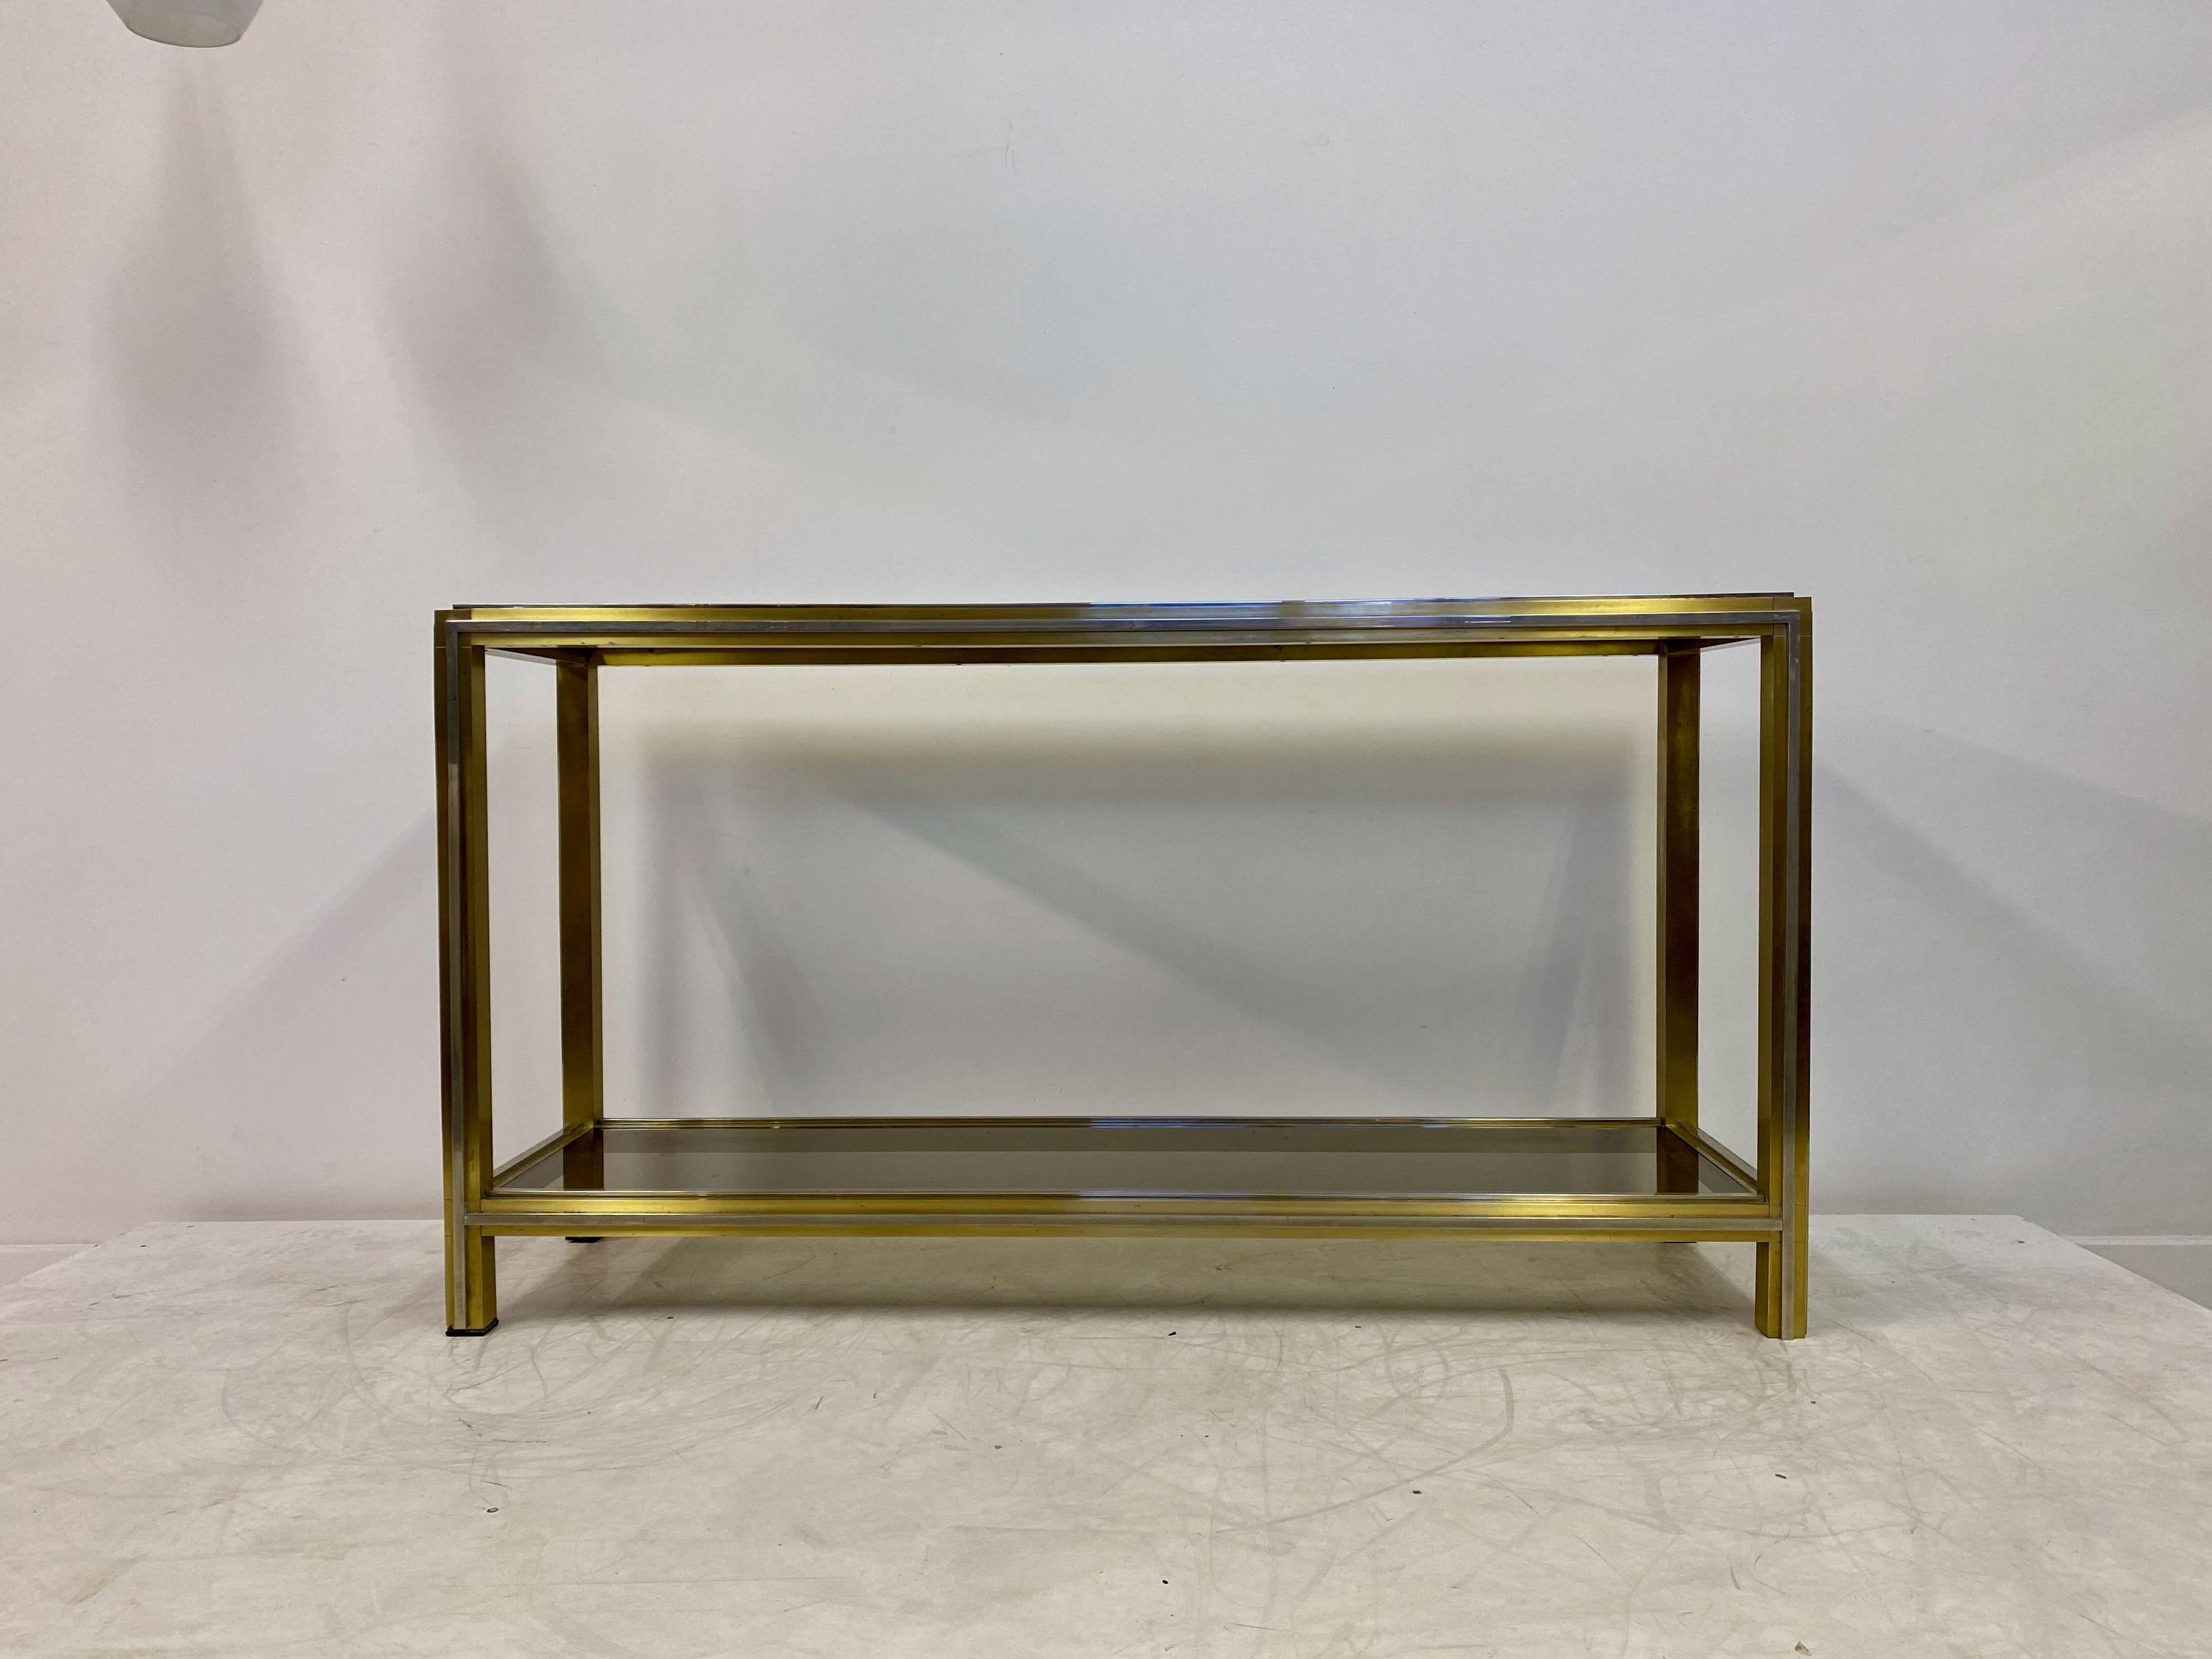 Console table

By Romeo Rega

Brass and chrome protruding bands

Excellent quality version of this type of table

Currently with original smoked glass but will be changed to toughened before sale. 

Clear glass can be chosen instead of